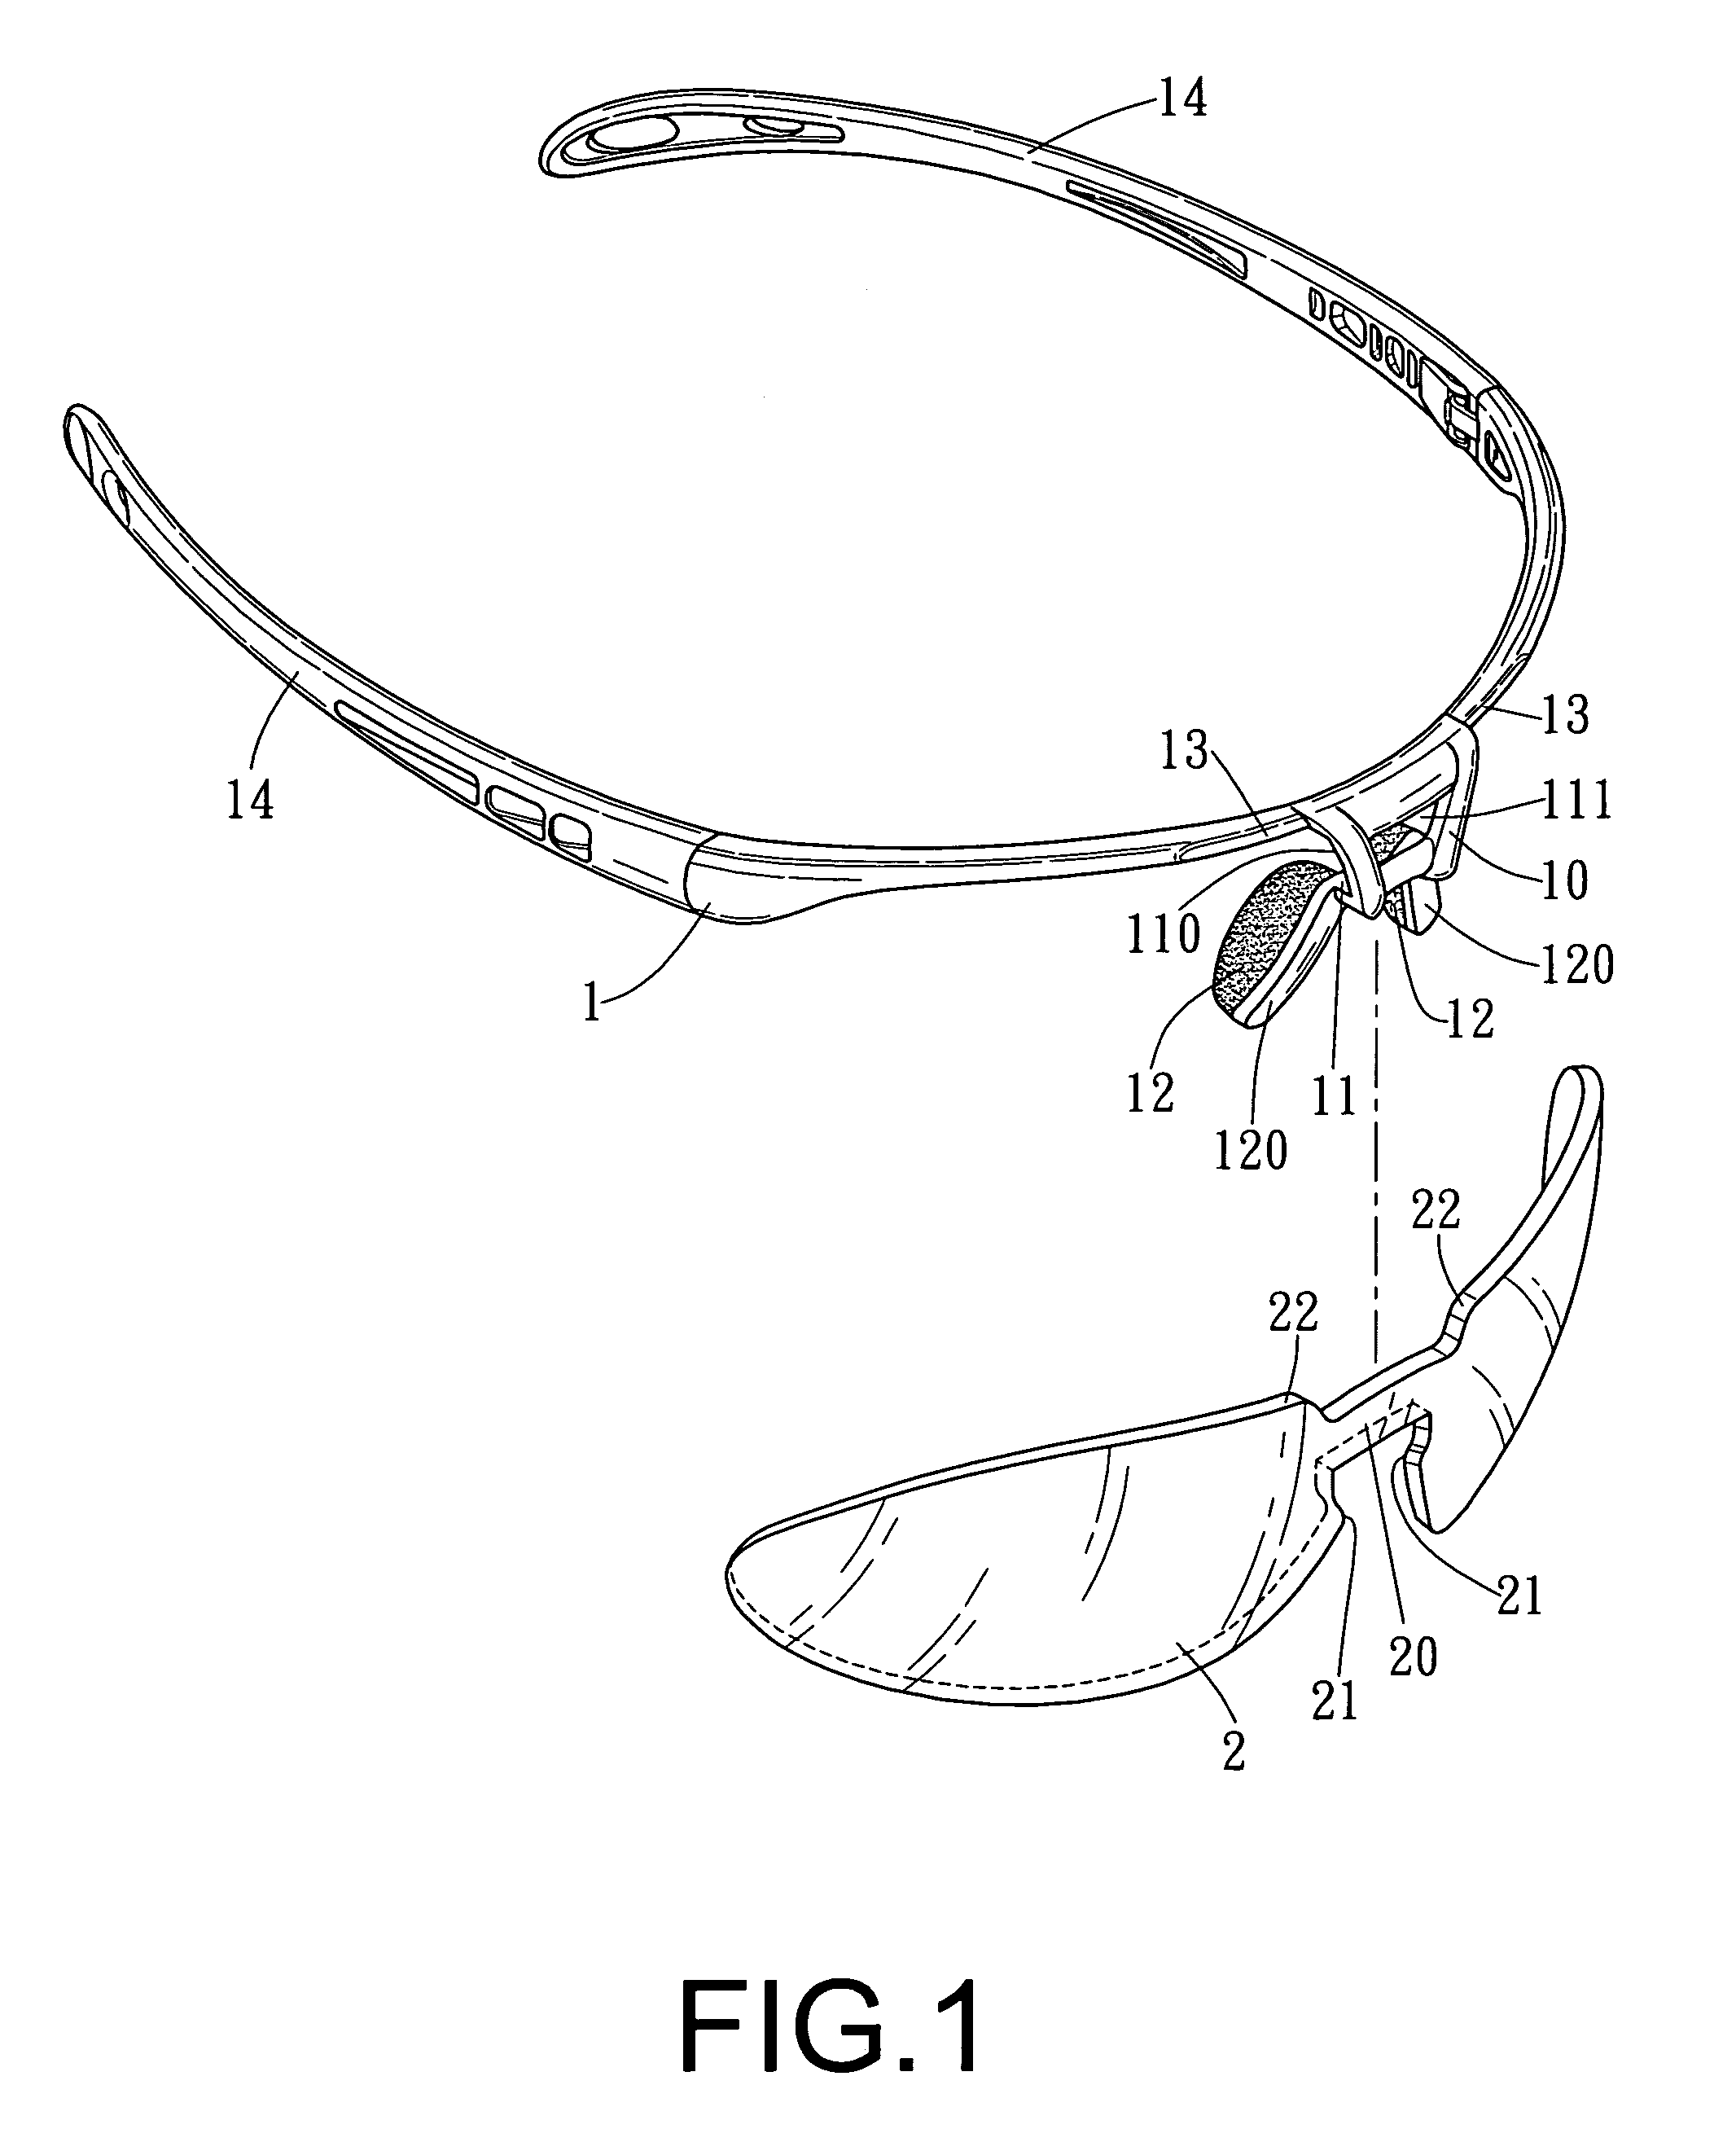 Easily assembled and detached eyeglass